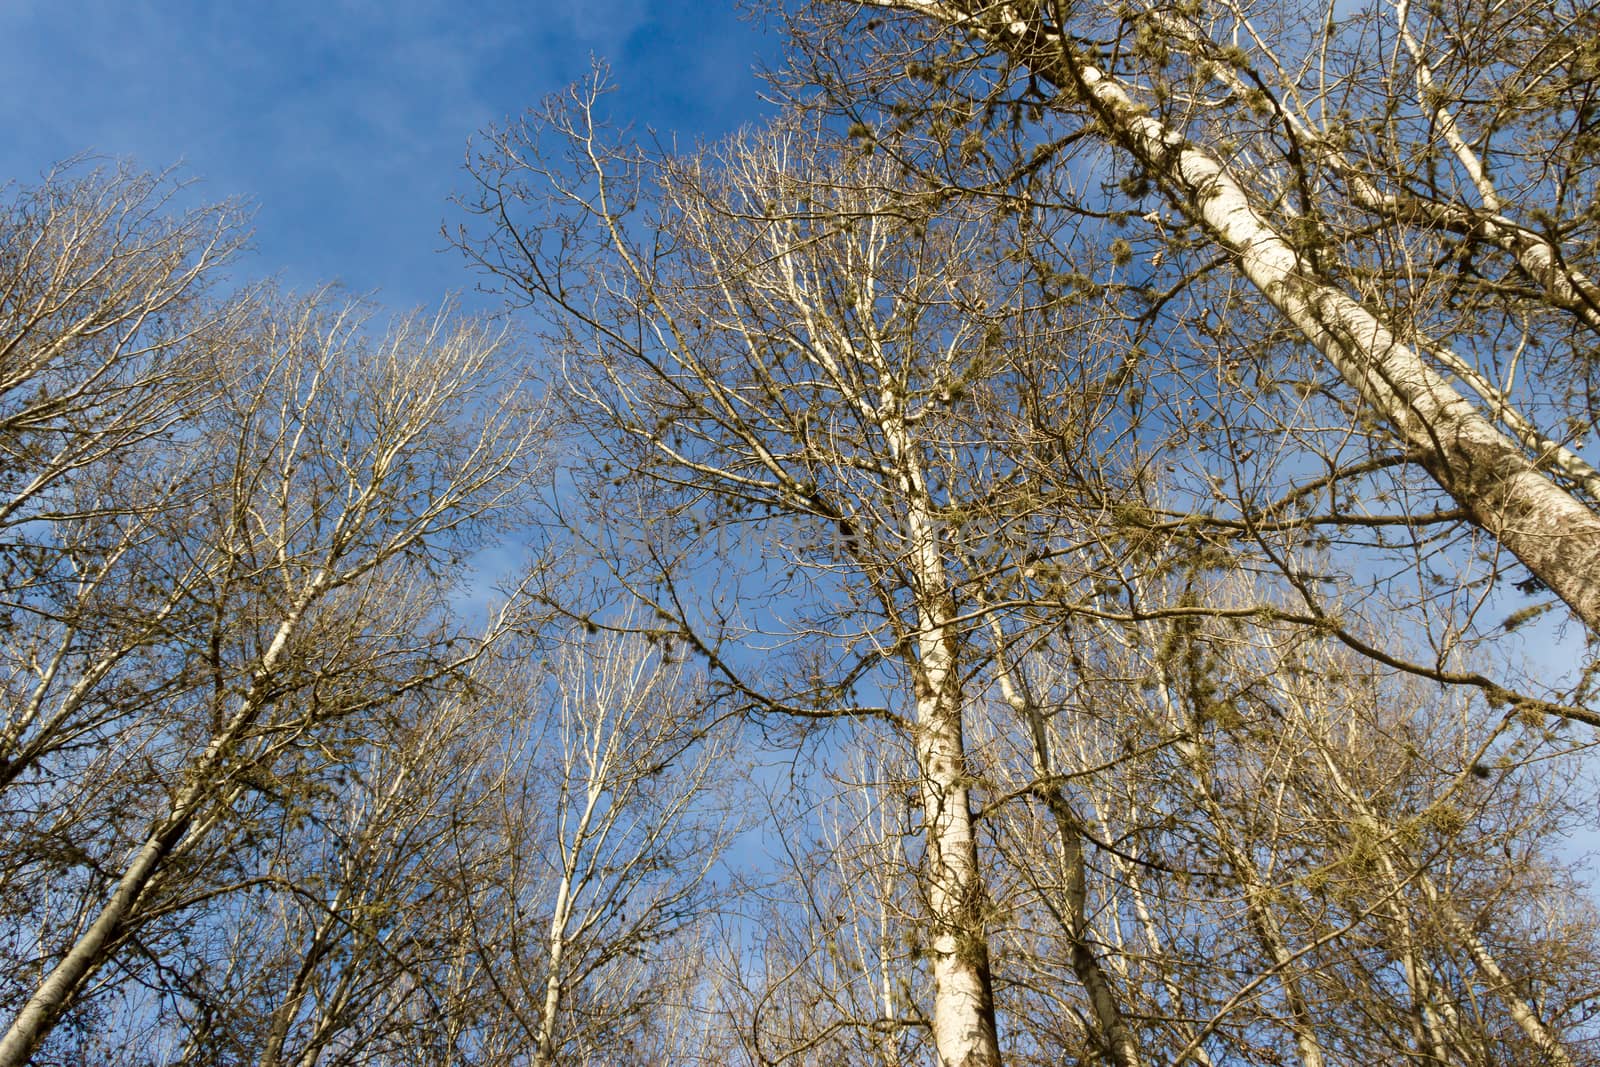 bottom view of the leafless pines in winter